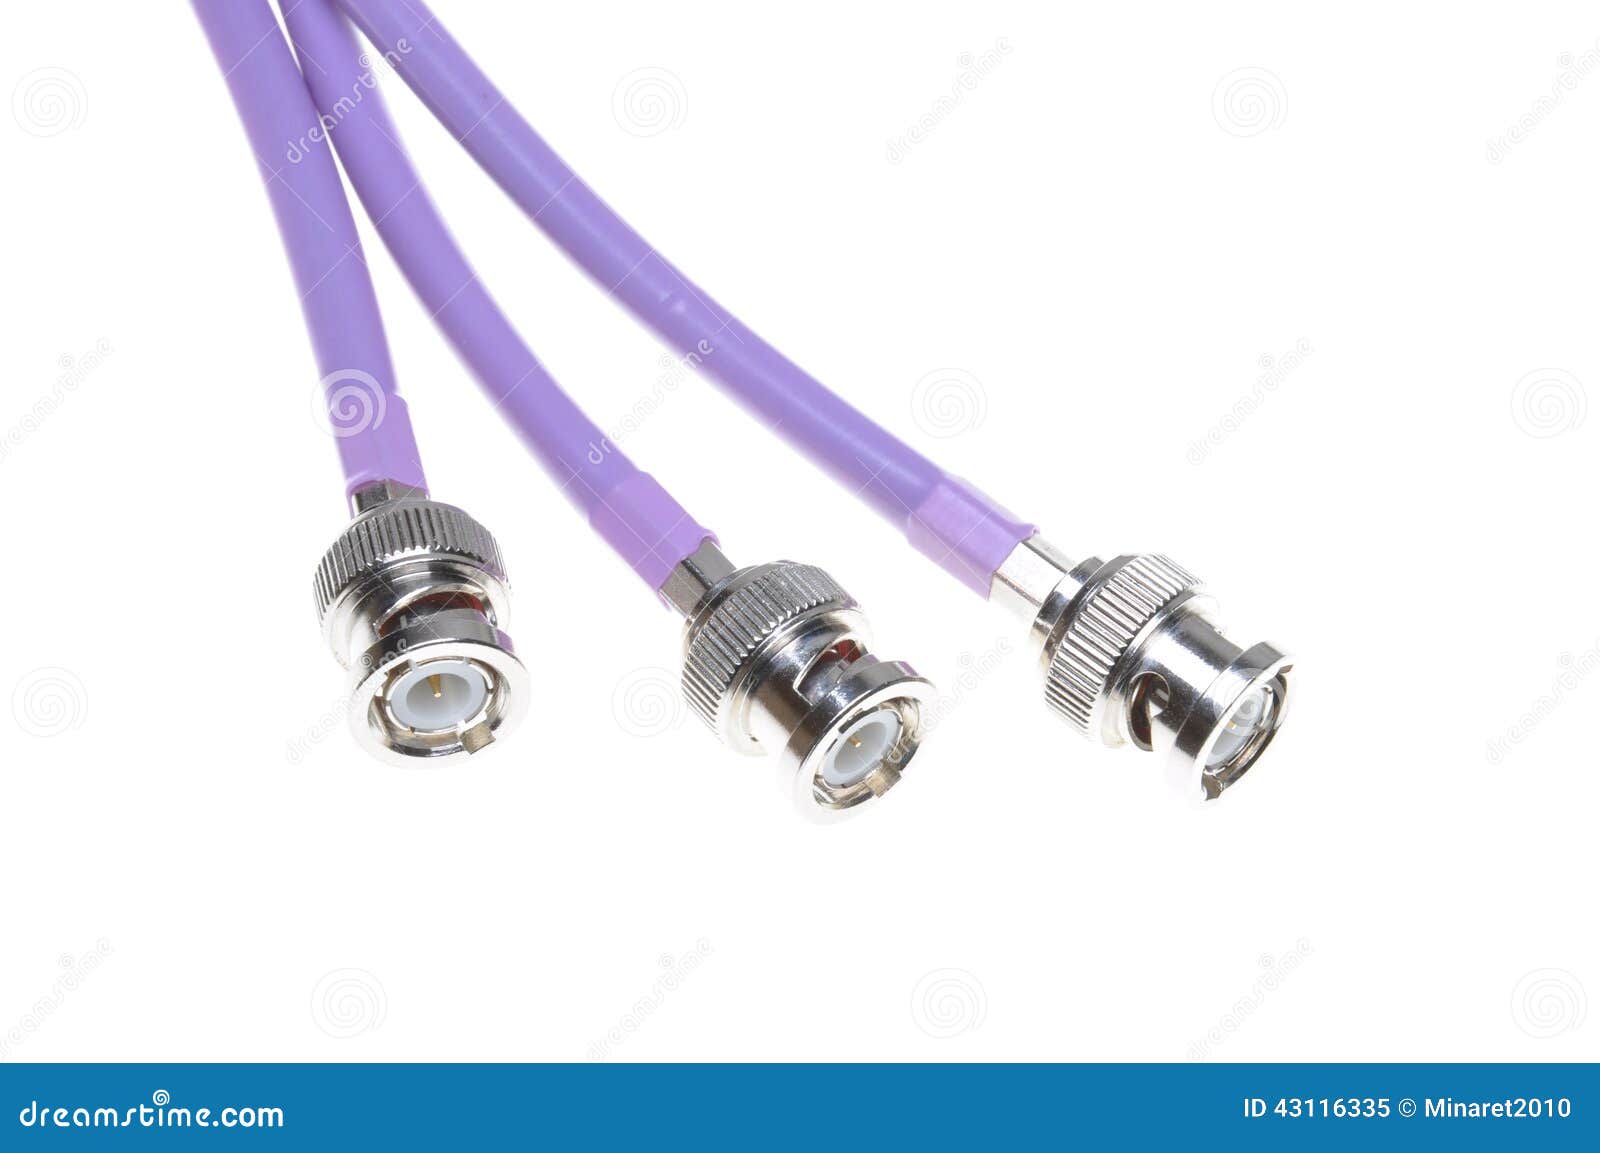 coaxial cables with bnc connectors